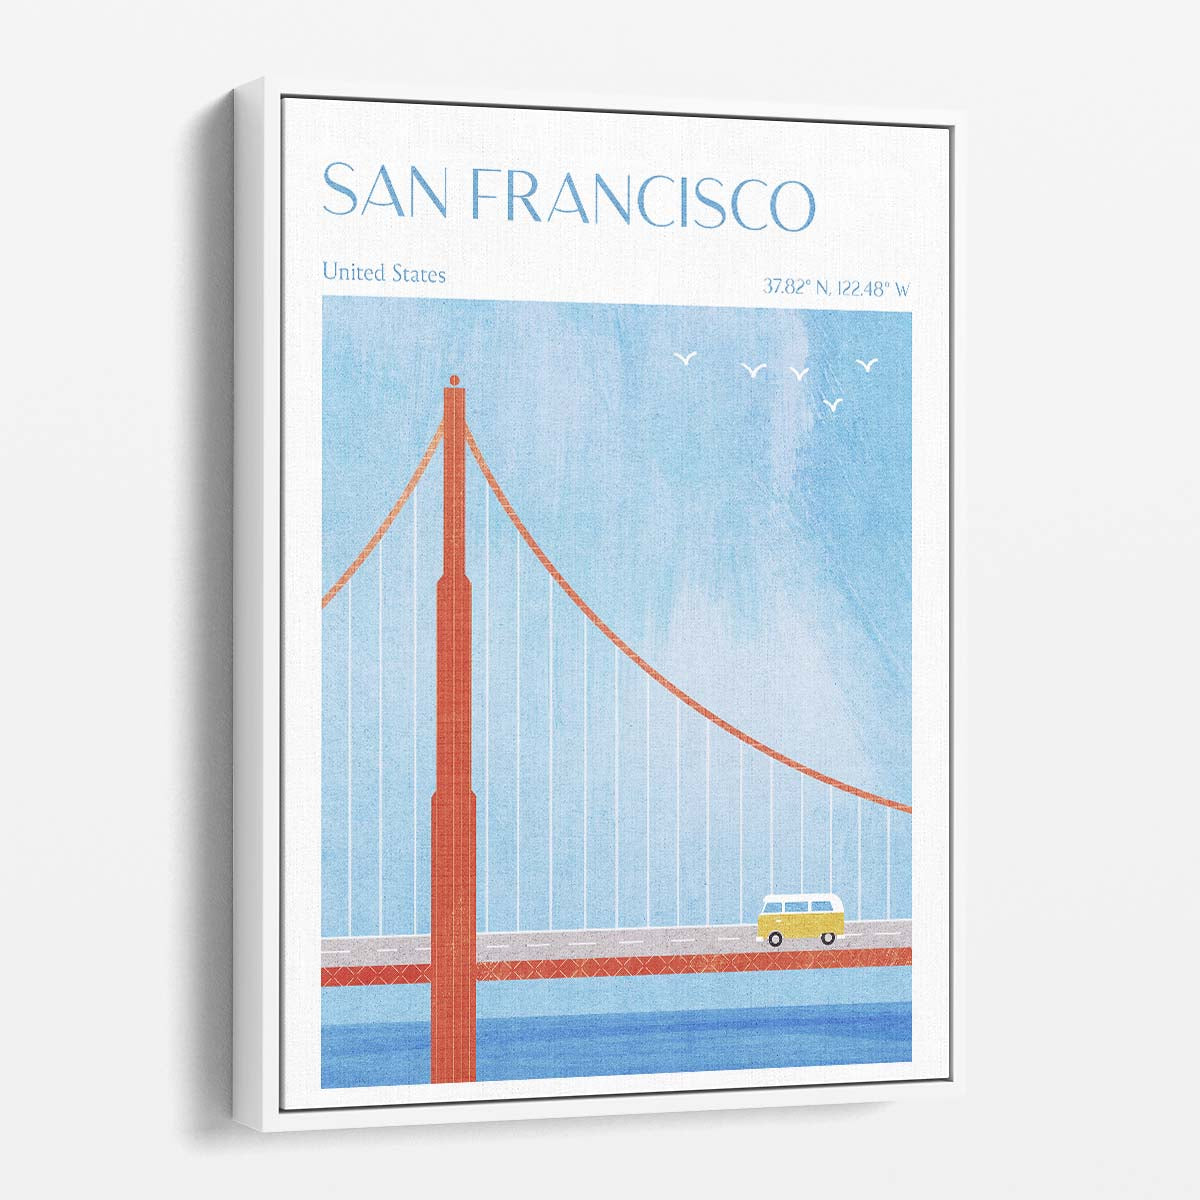 Colorful Inspirational Illustration of San Francisco's Iconic Golden Gate Bridge by Luxuriance Designs, made in USA